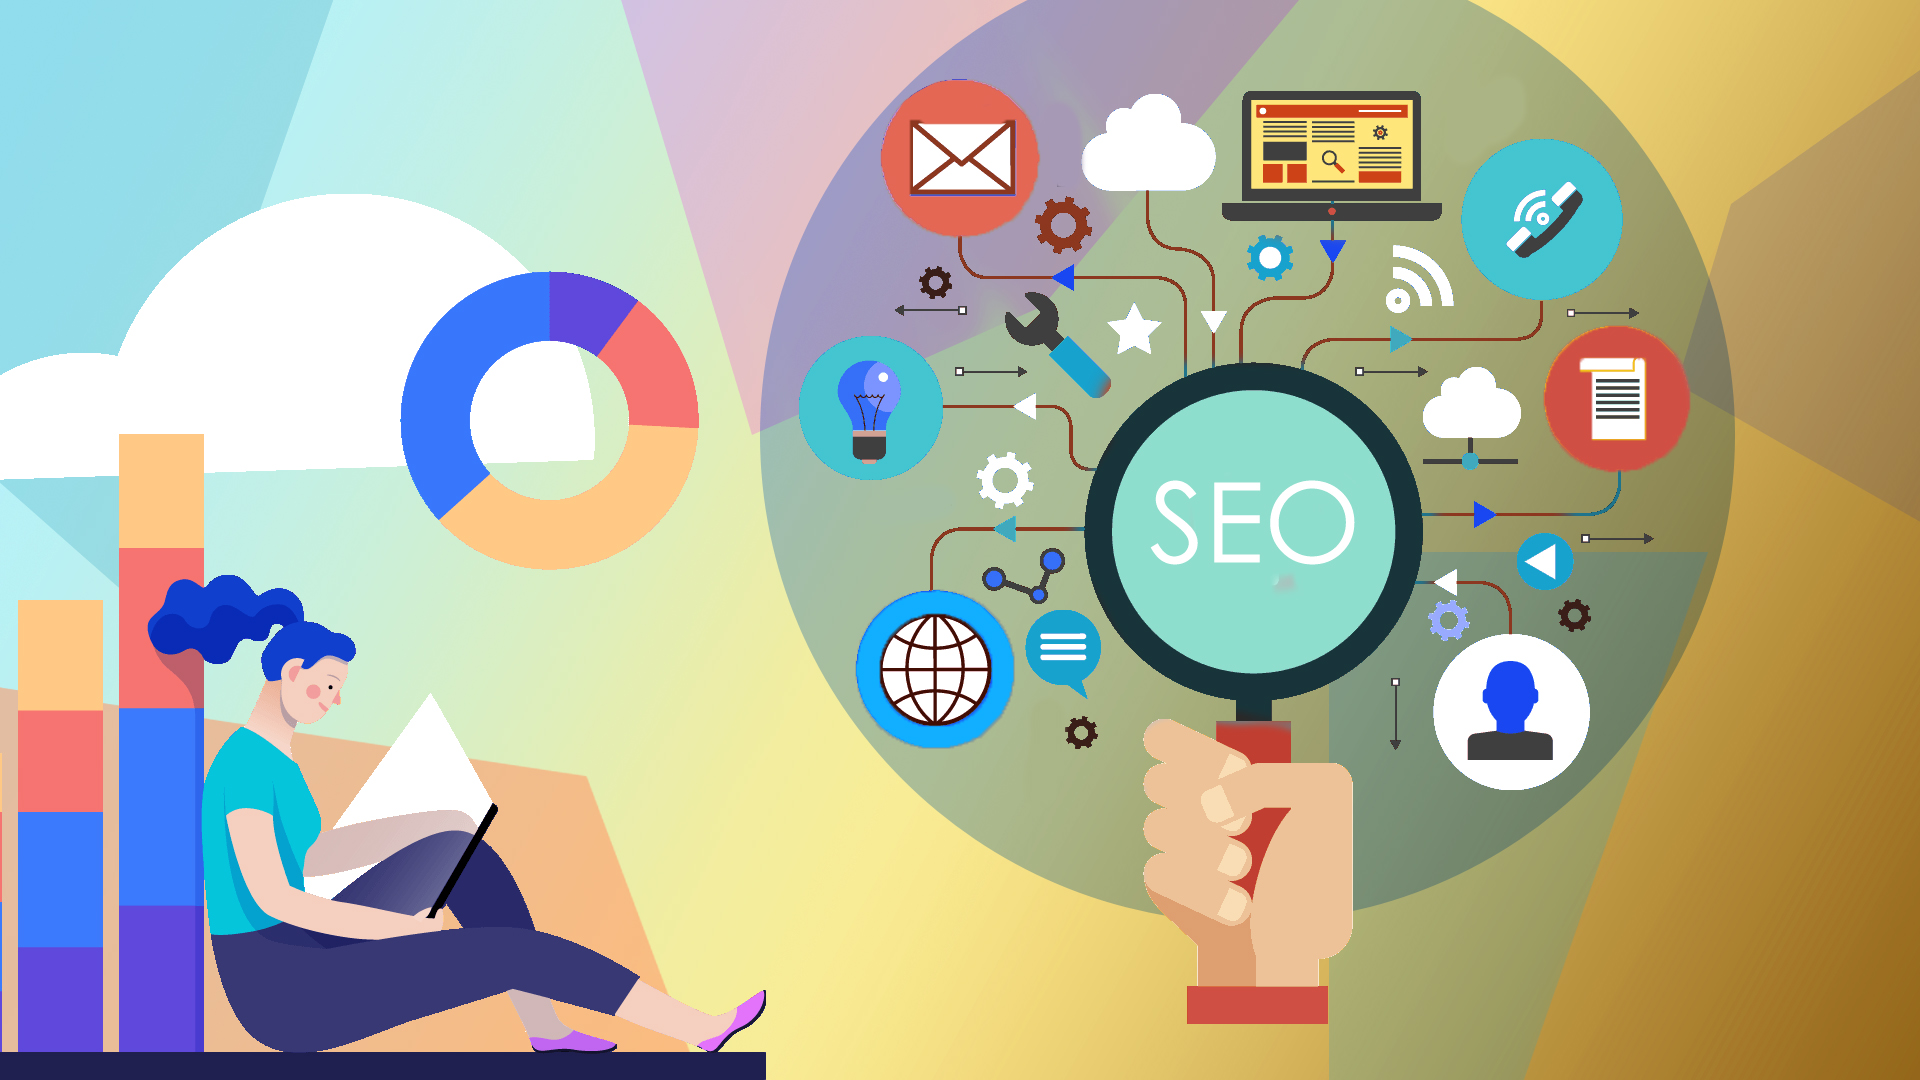 Role of SEO in the Digital Marketing World